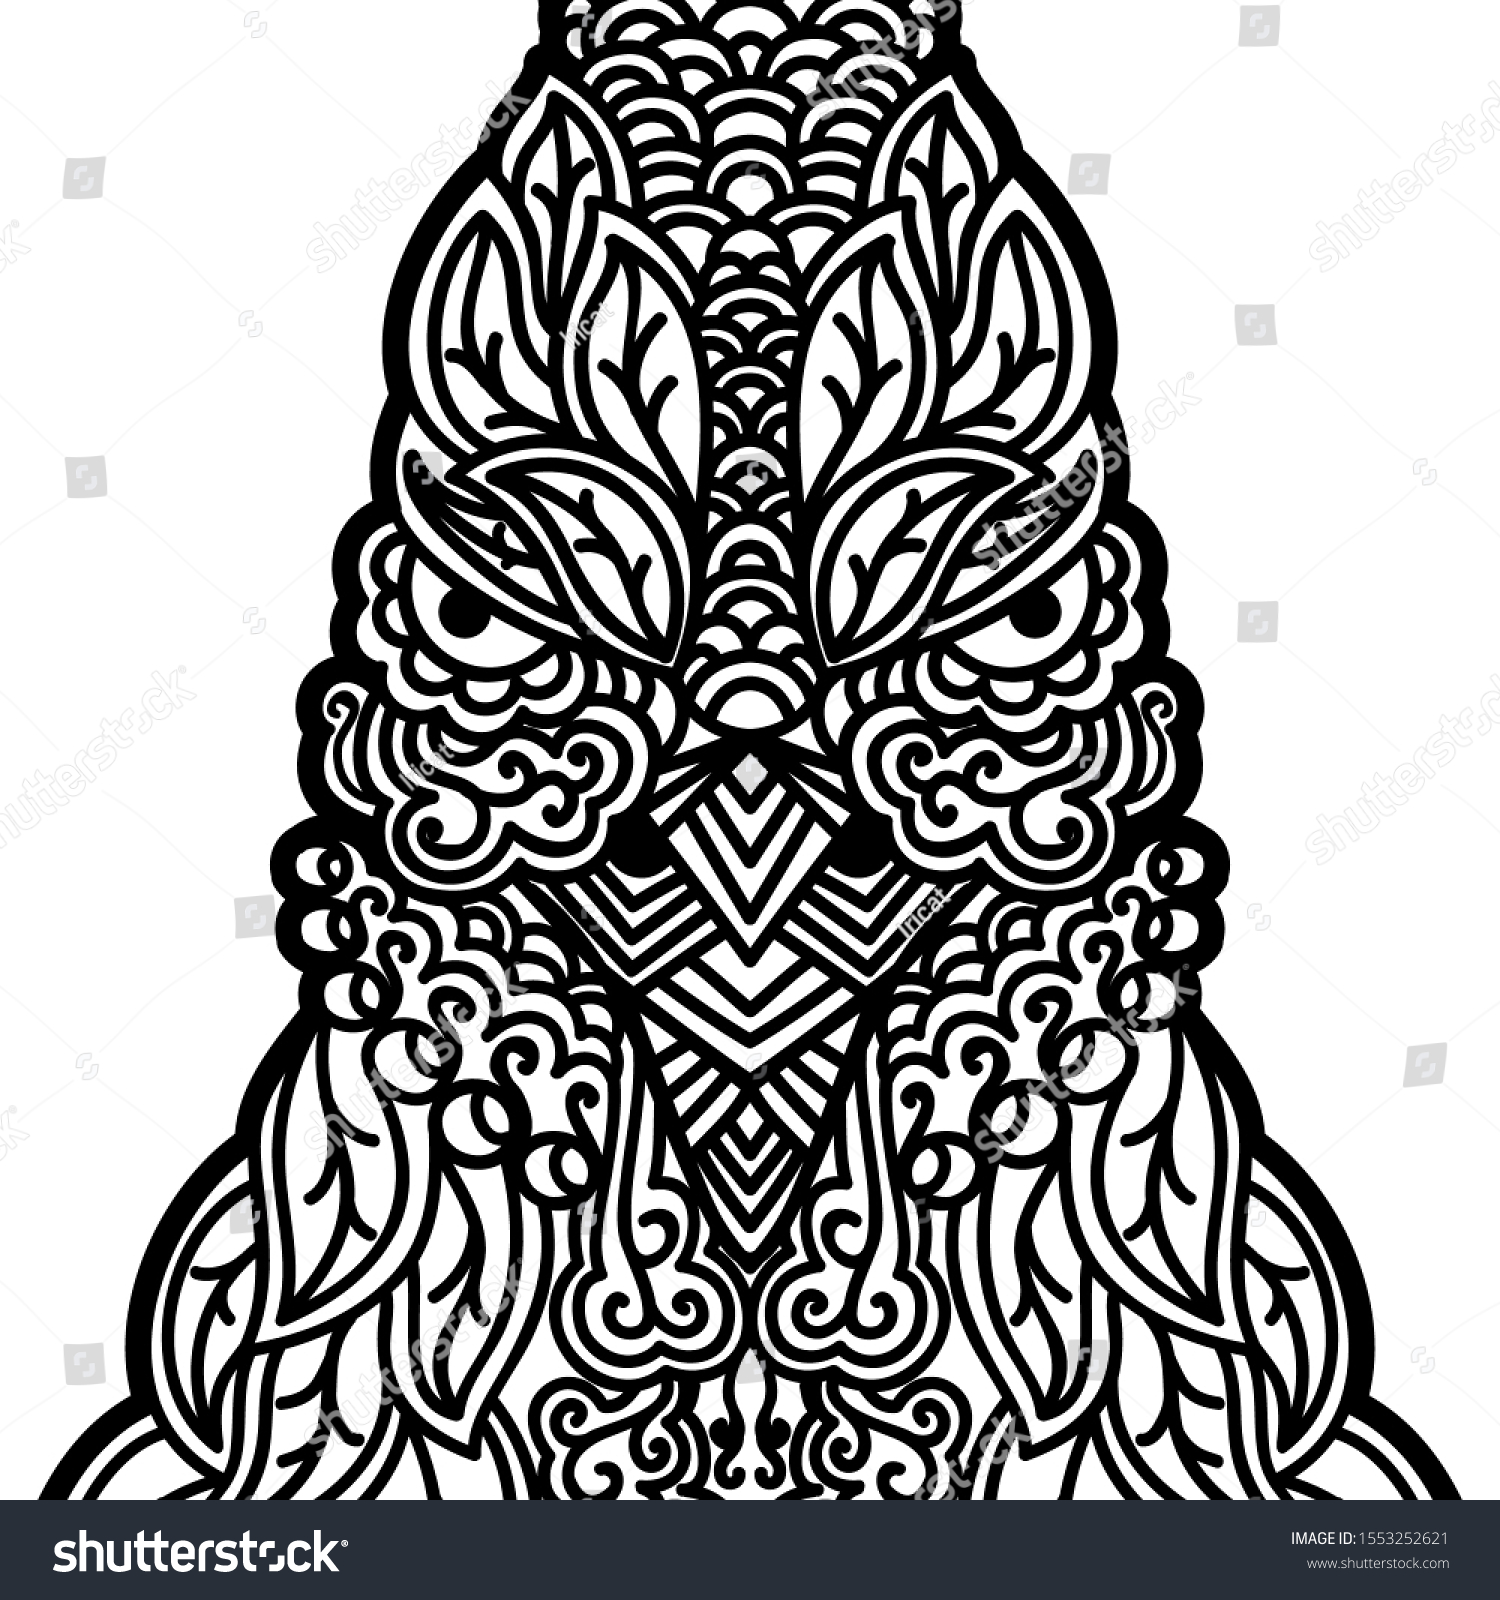 SVG of Ethnic patterned ornate hand drawn head of rooster. Abstract card with detailed snout. Black and white outline doodle background. Sketch for tattoo, poster, print or t-shirt. Vector illustration svg